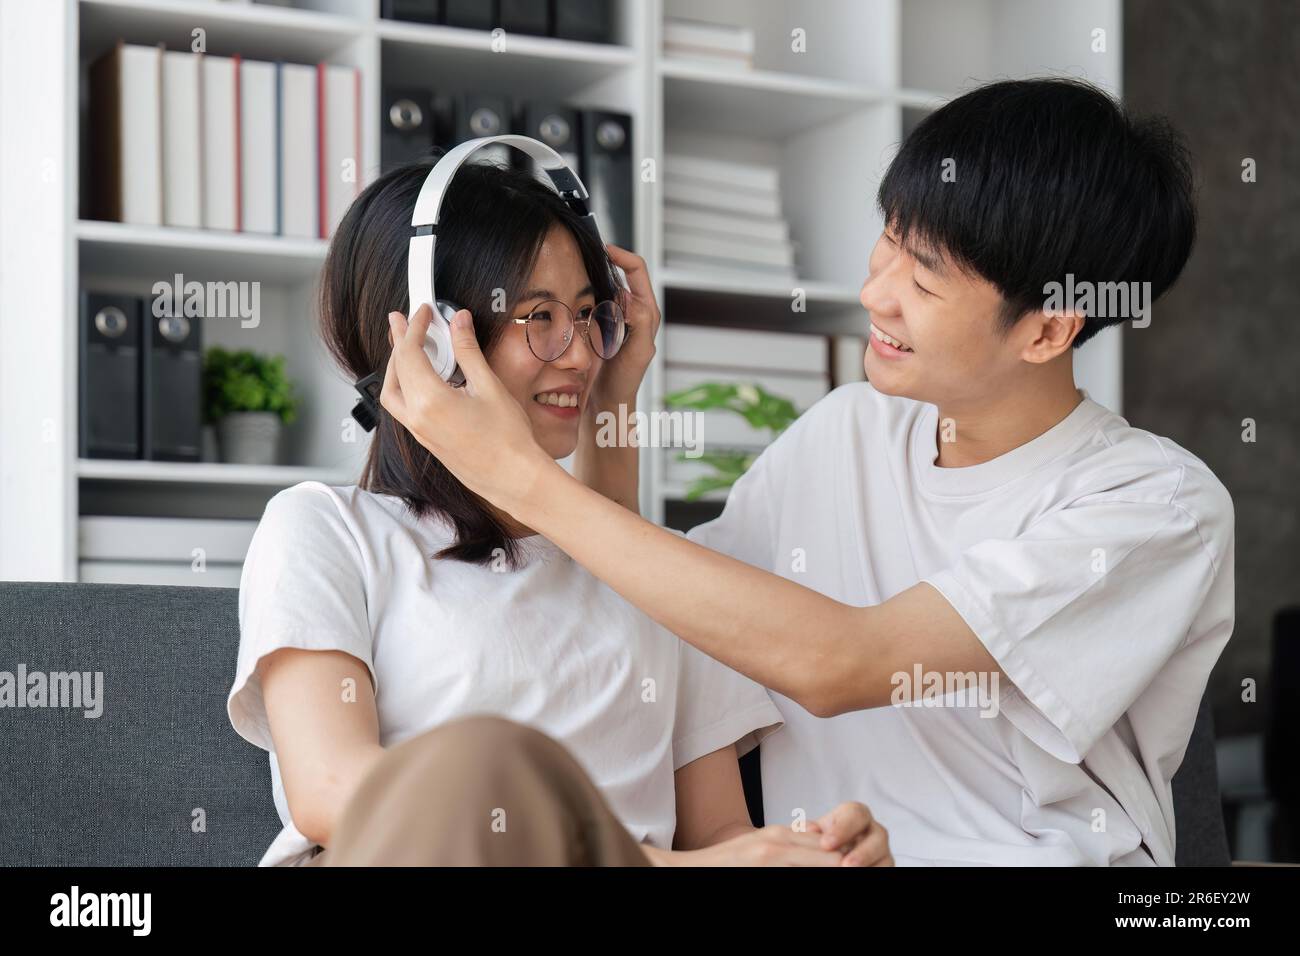 Activity at home concept, couple wears headphone to girlfriend and listening music together Stock Photo